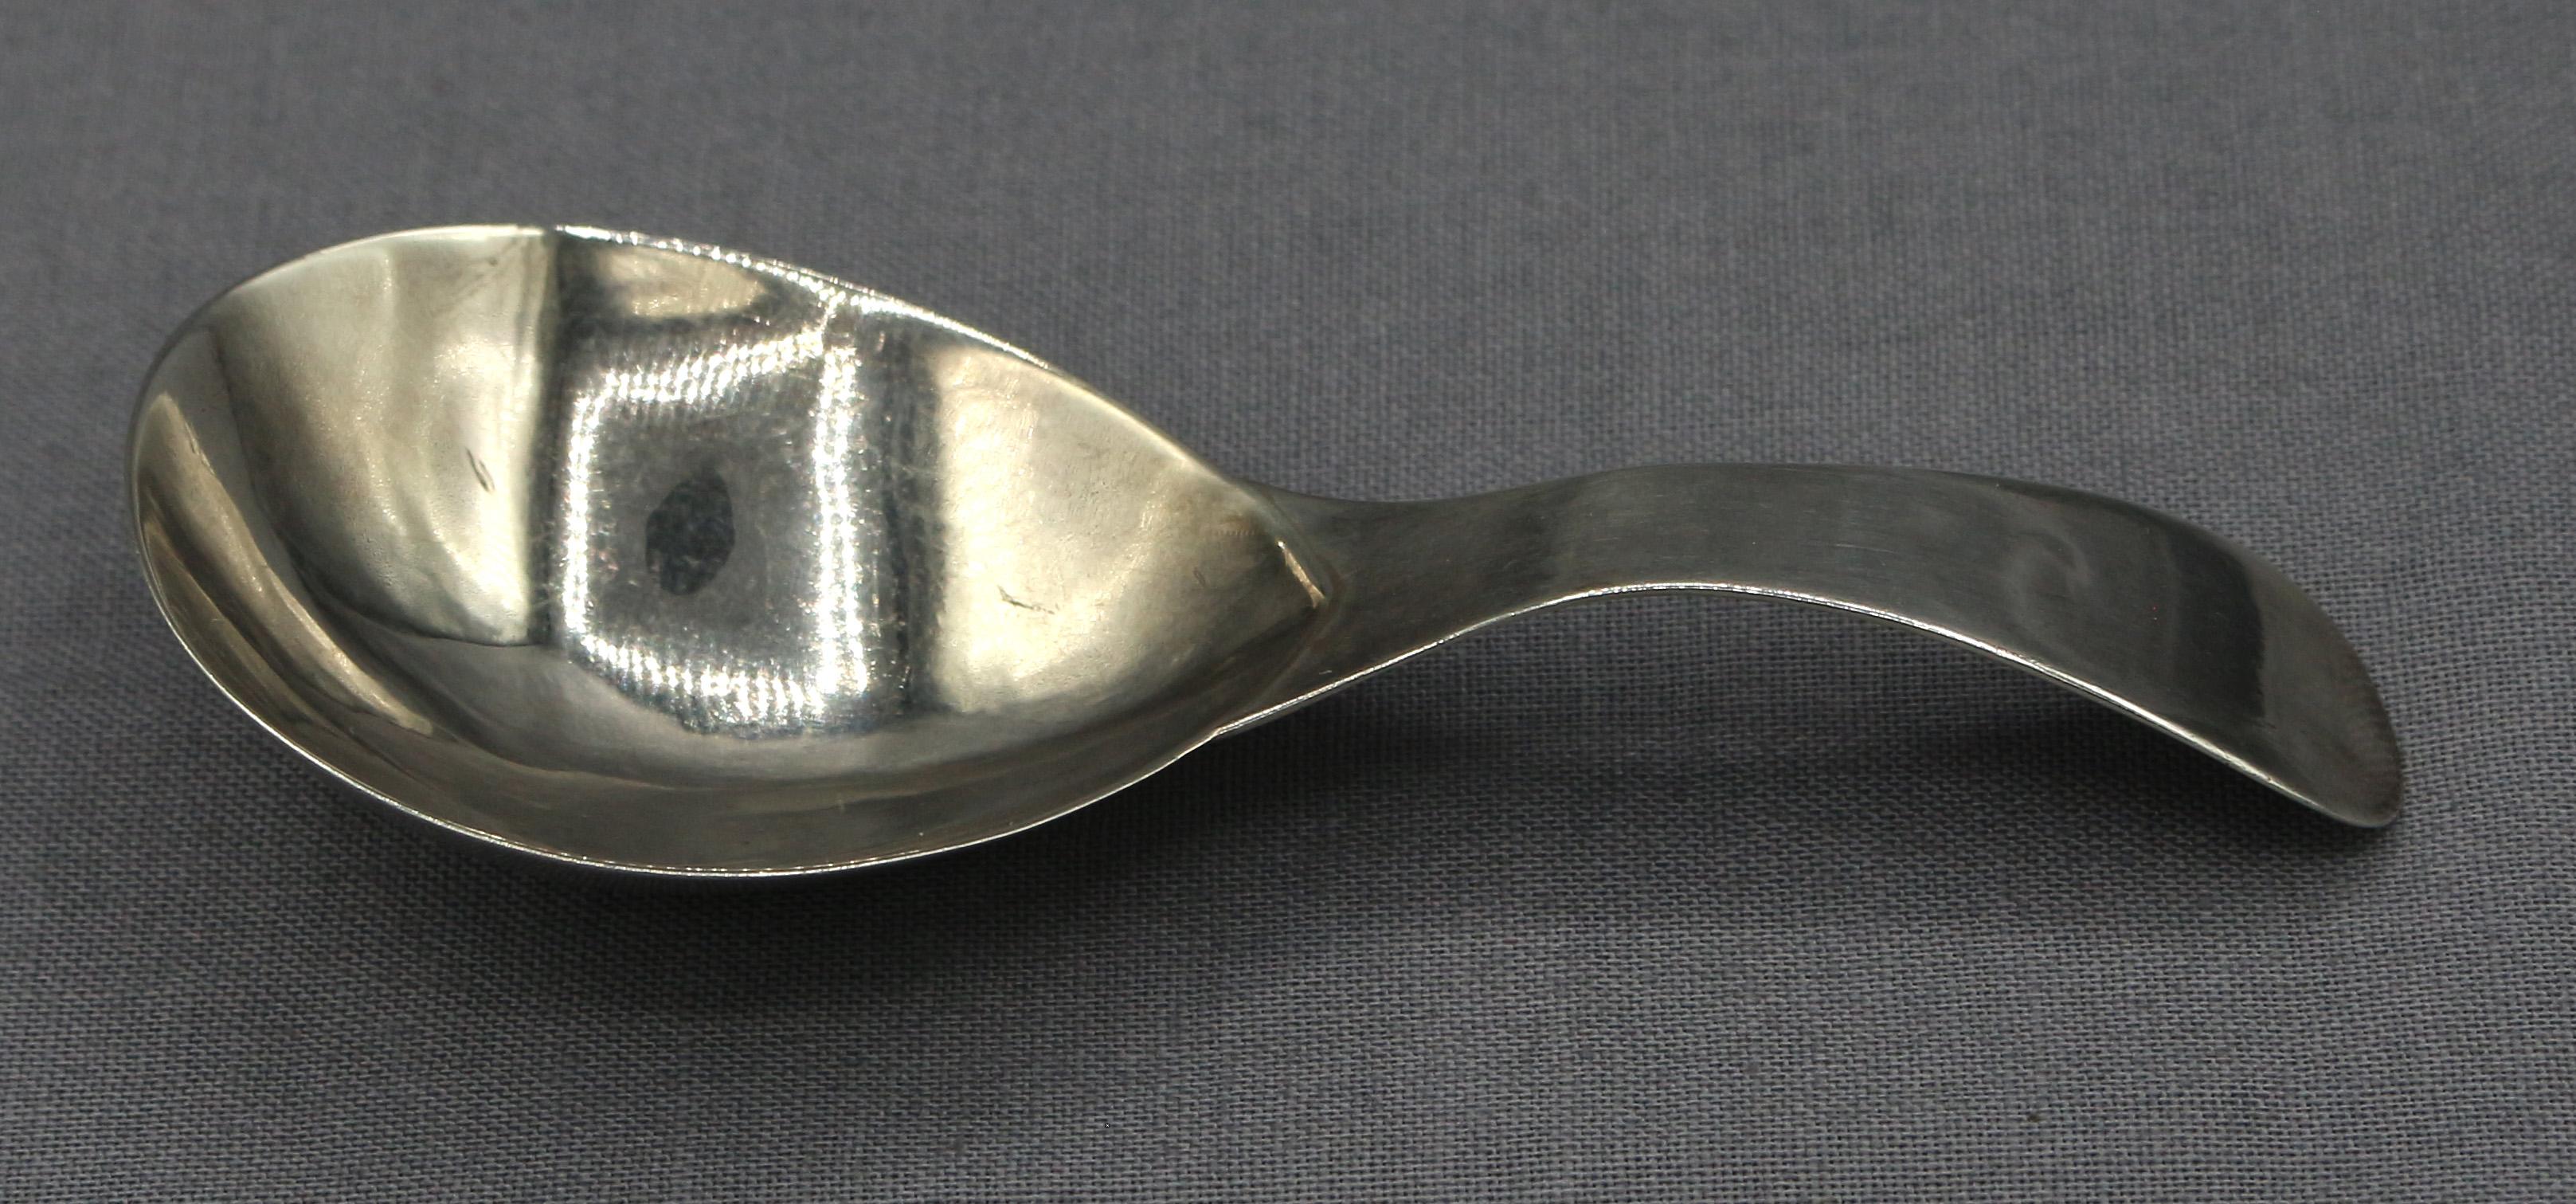 Sterling silver tea caddy spoon by Hester Bateman, London, 1790. Old English pattern. While several elaborate models were in her offerings, this simple example best typifies her clientele of more modest means. 0.30 troy oz.
3.5